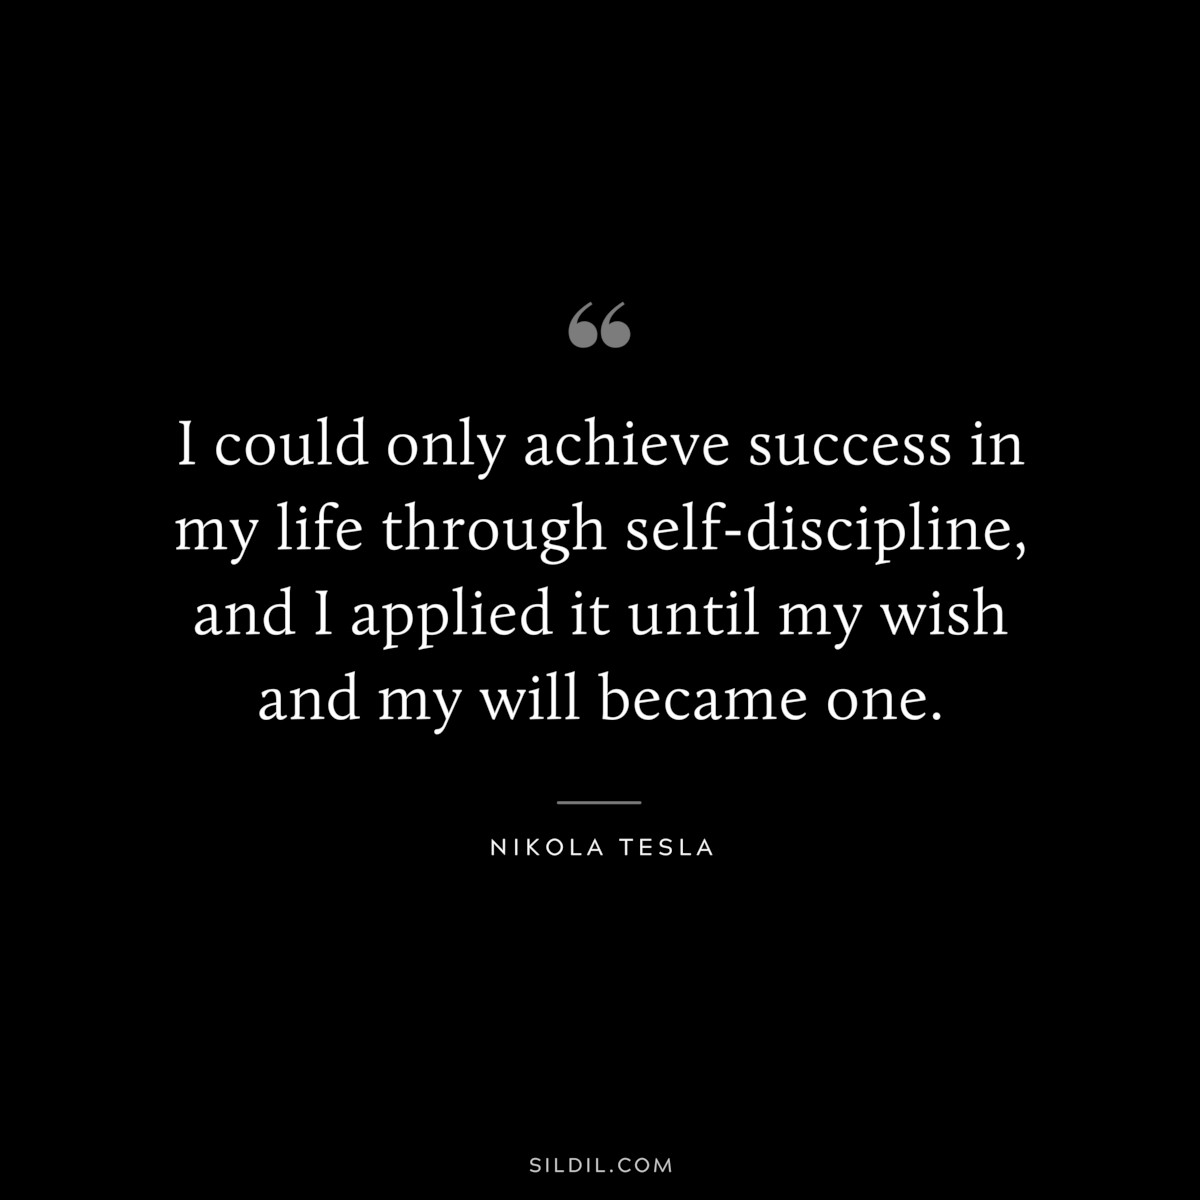 I could only achieve success in my life through self-discipline, and I applied it until my wish and my will became one. ― Nikola Tesla